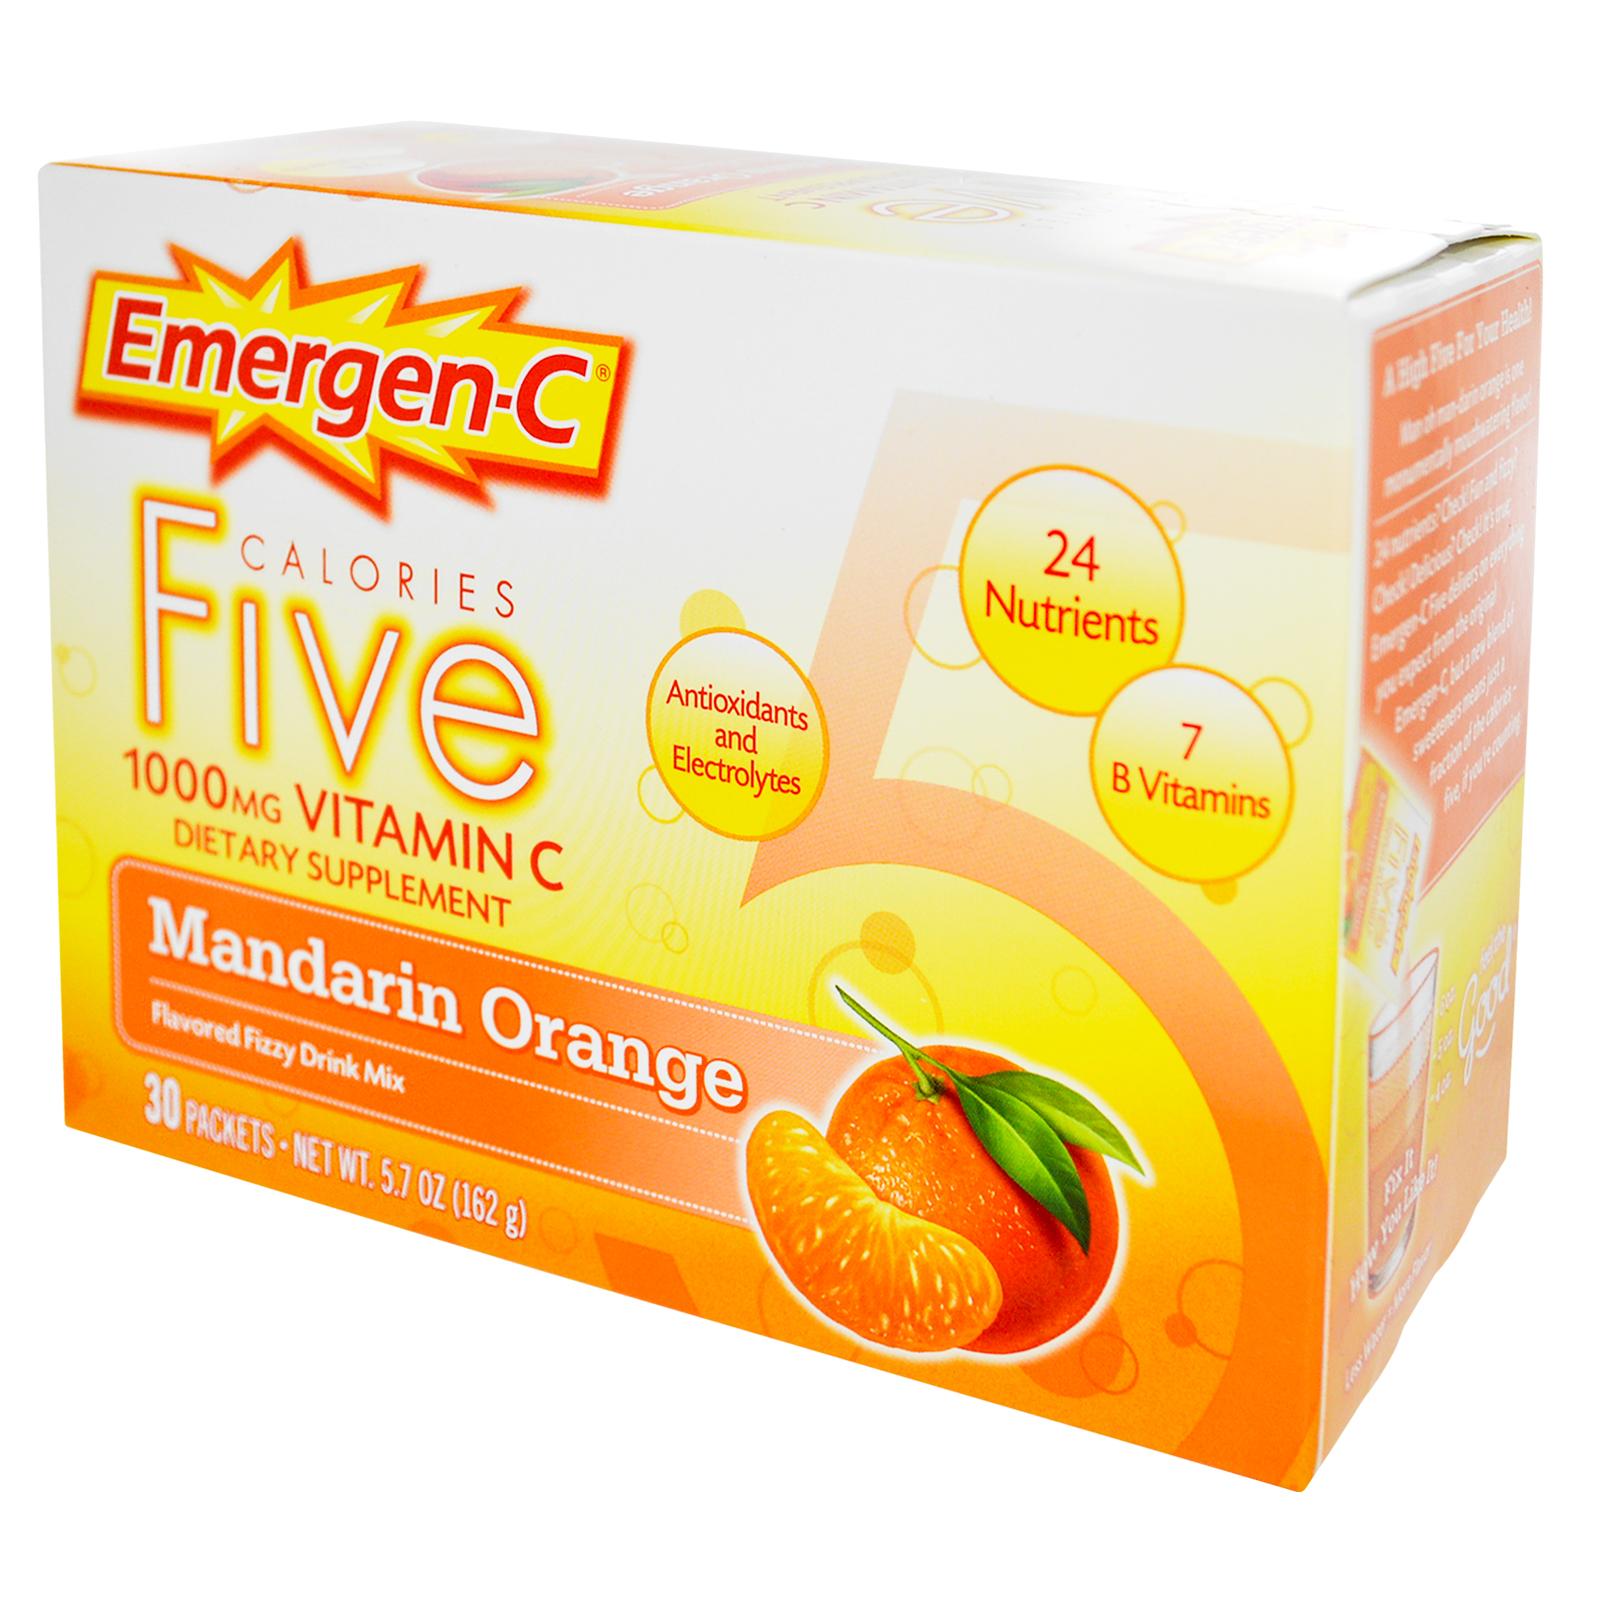  EMERGEN-C - THE LAST THING YOU WANT TO DO IS SPEND YOUR TRIP SICK IN BED.&nbsp; 